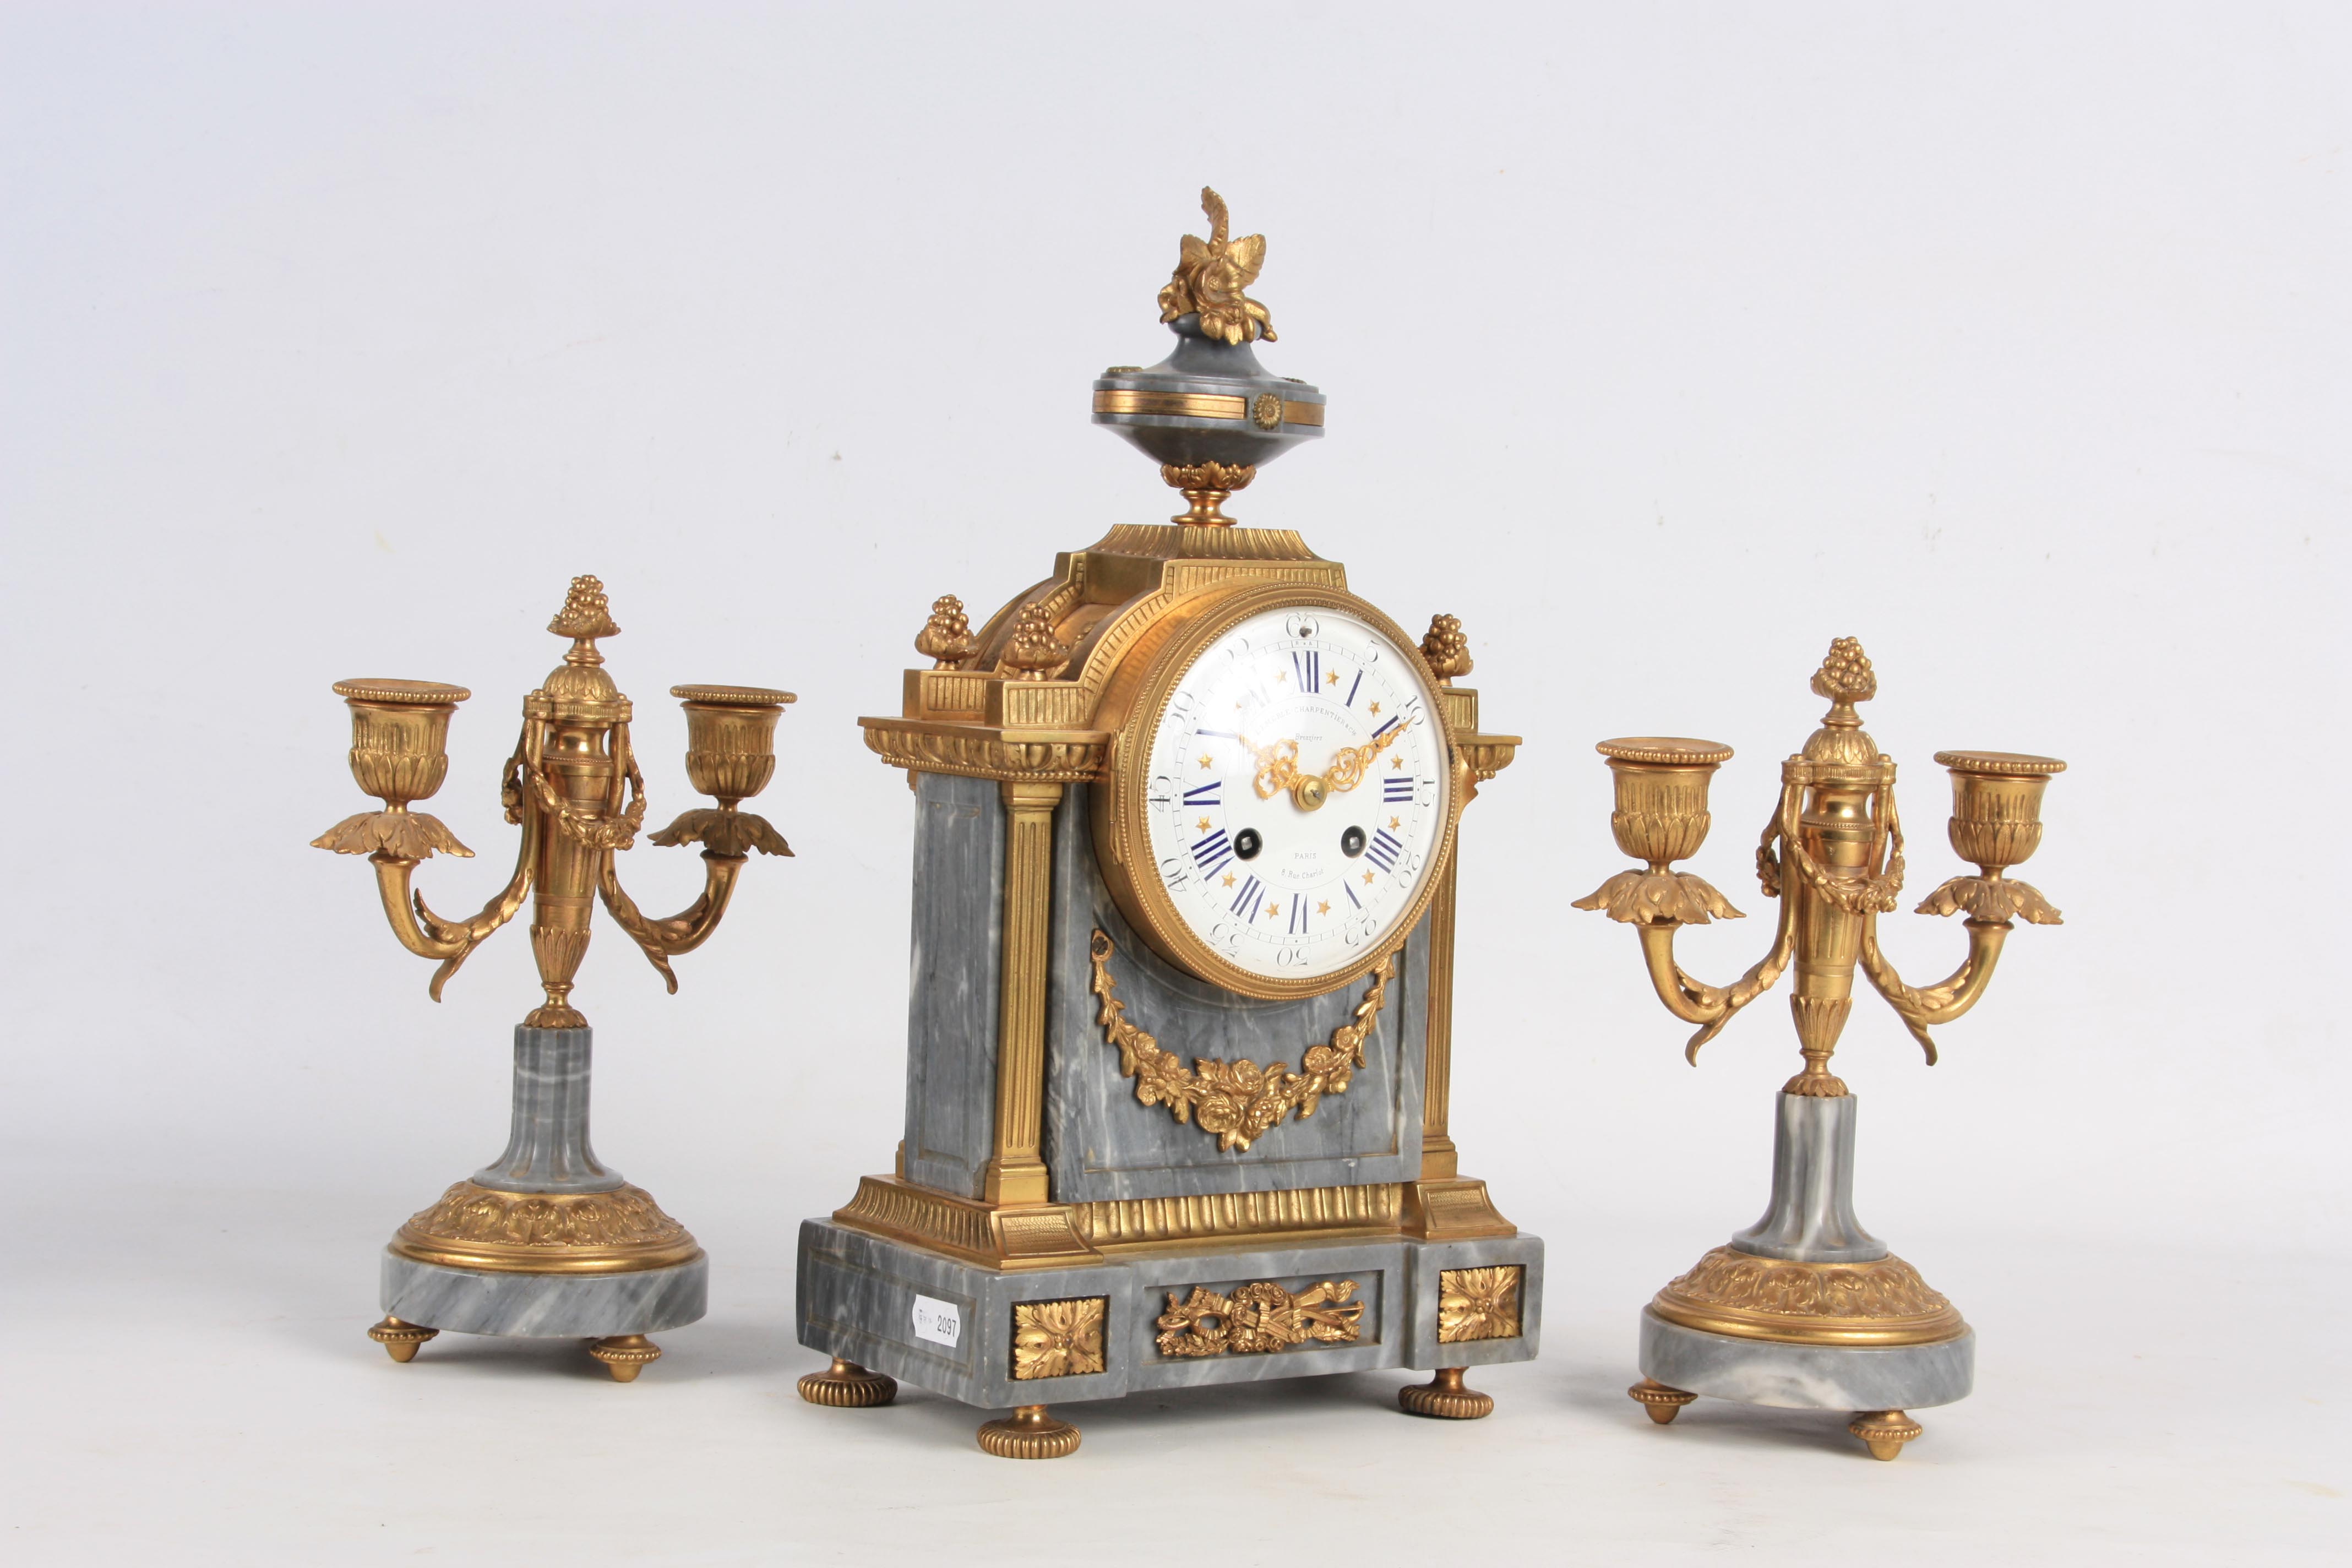 LEMERLE-CHARPENTIER & CIE, PARIS A MID 19TH CENTURY FRENCH MARBLE AND ORMOLU CLOCK GARNITURE the - Image 7 of 14